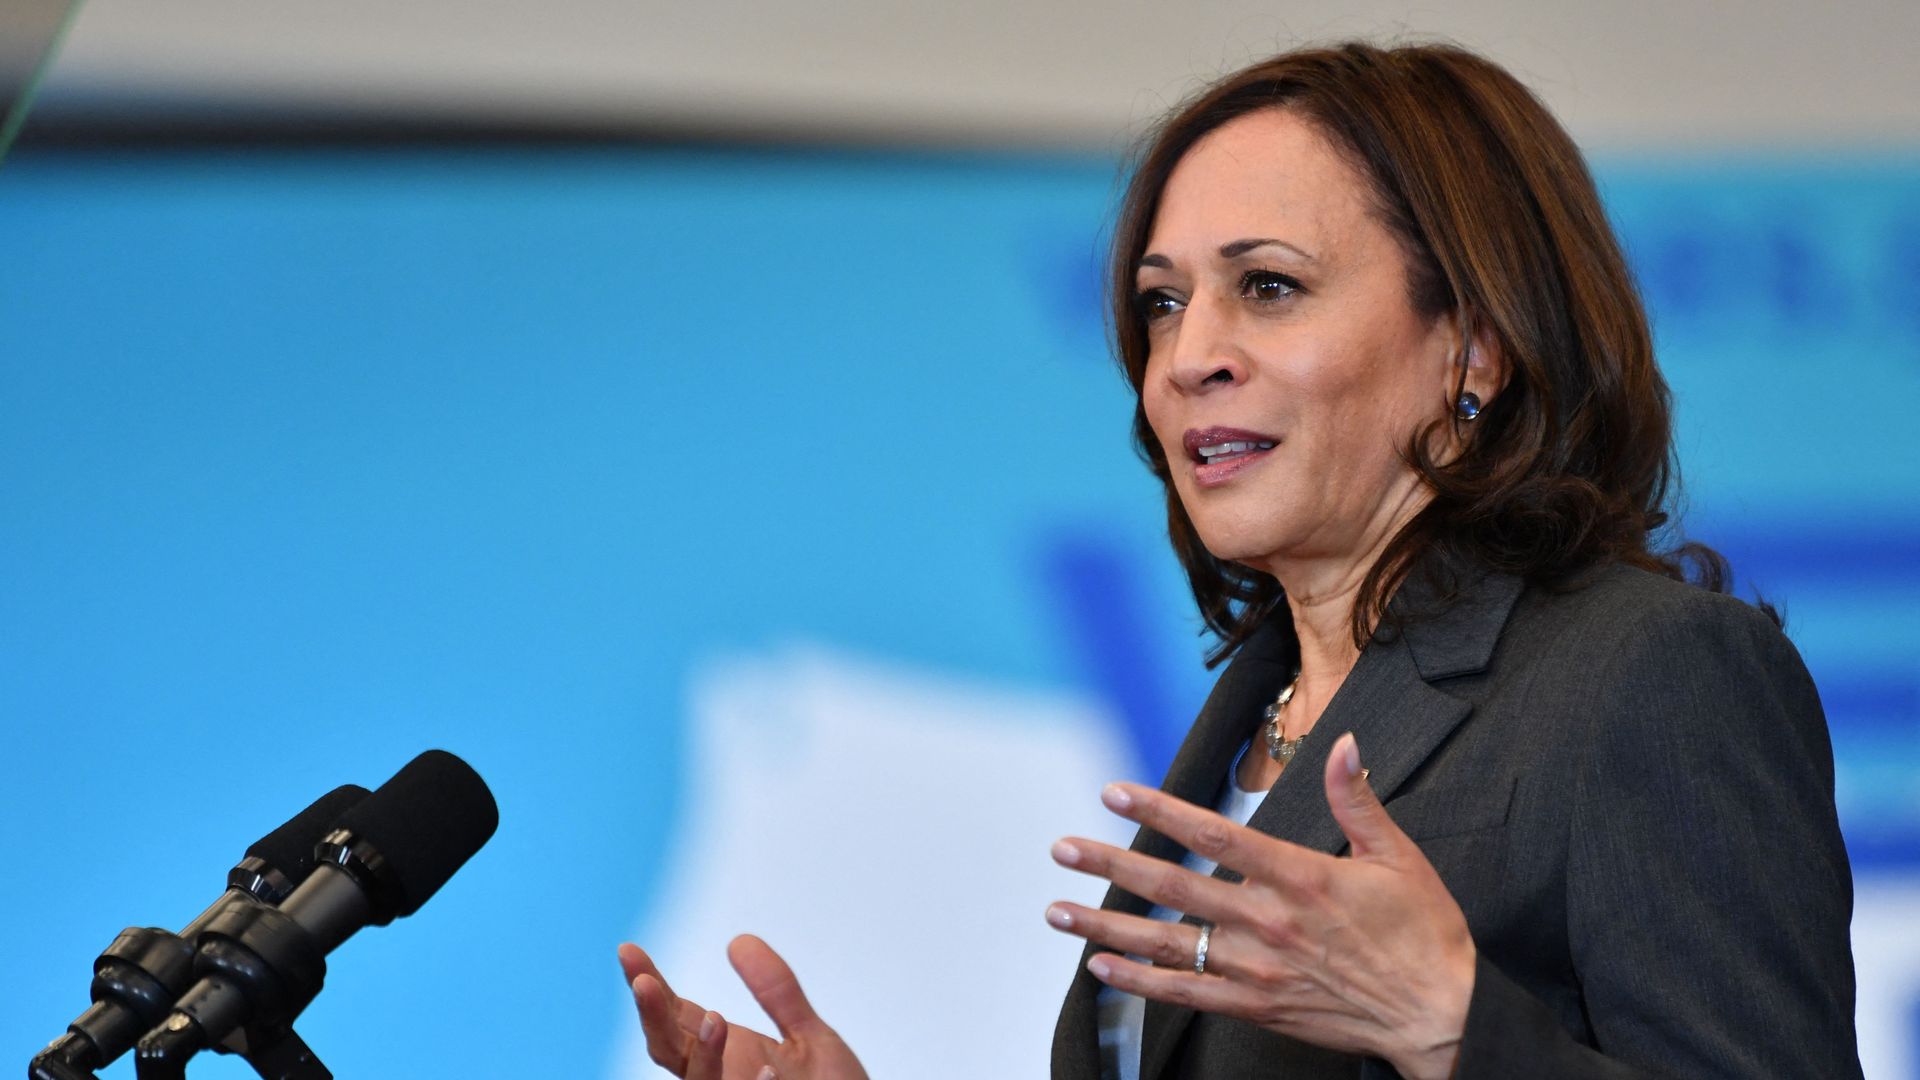 Photo of Kamala Harris speaking and gesturing with her hands